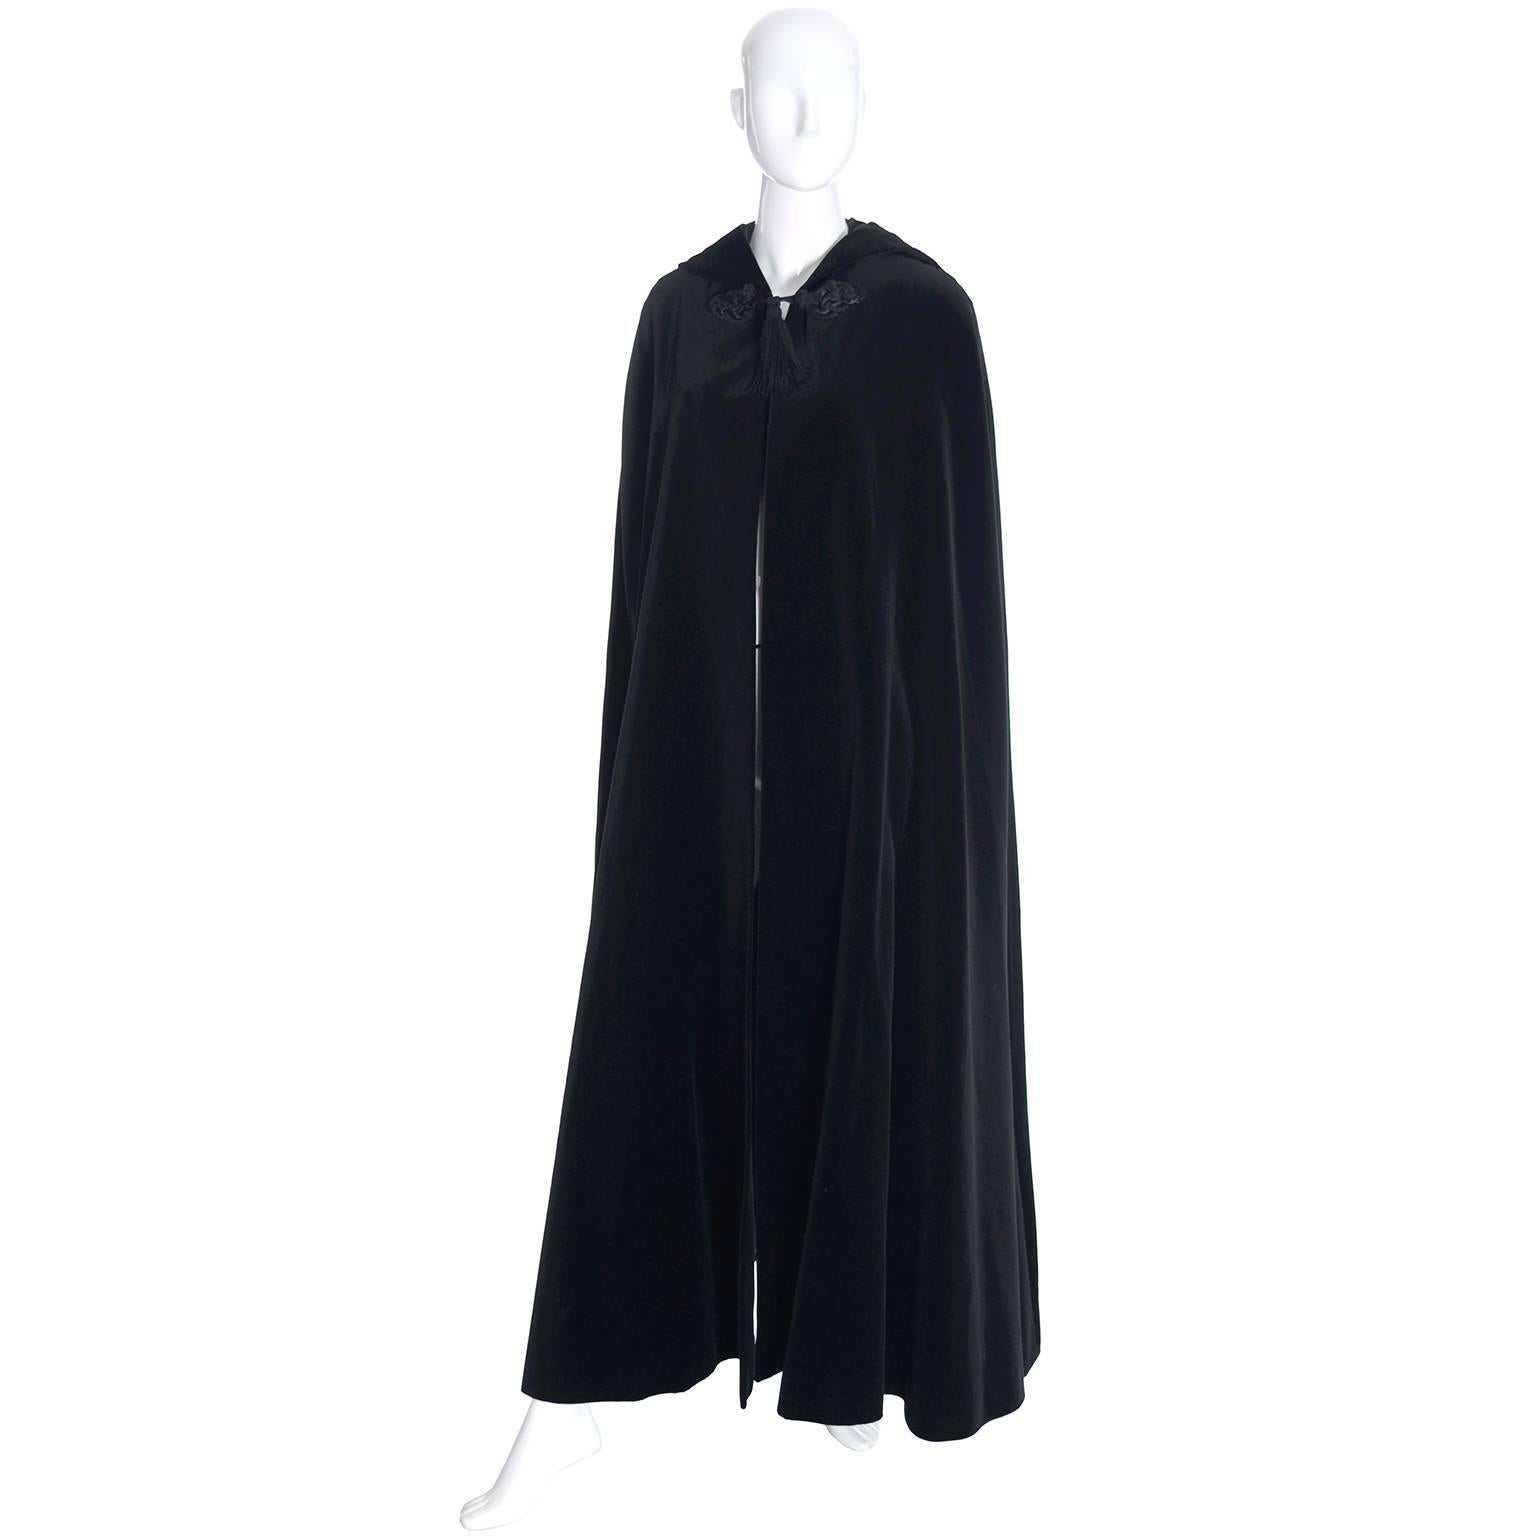 This is a gorgeous YSL vintage black velvet, fully lined opera cape. This dramatic vintage cape has a pointed hood and fine details including silk tassels and soutache trim. This piece has the Yves Saint Laurent Rive Gauche label and is from the